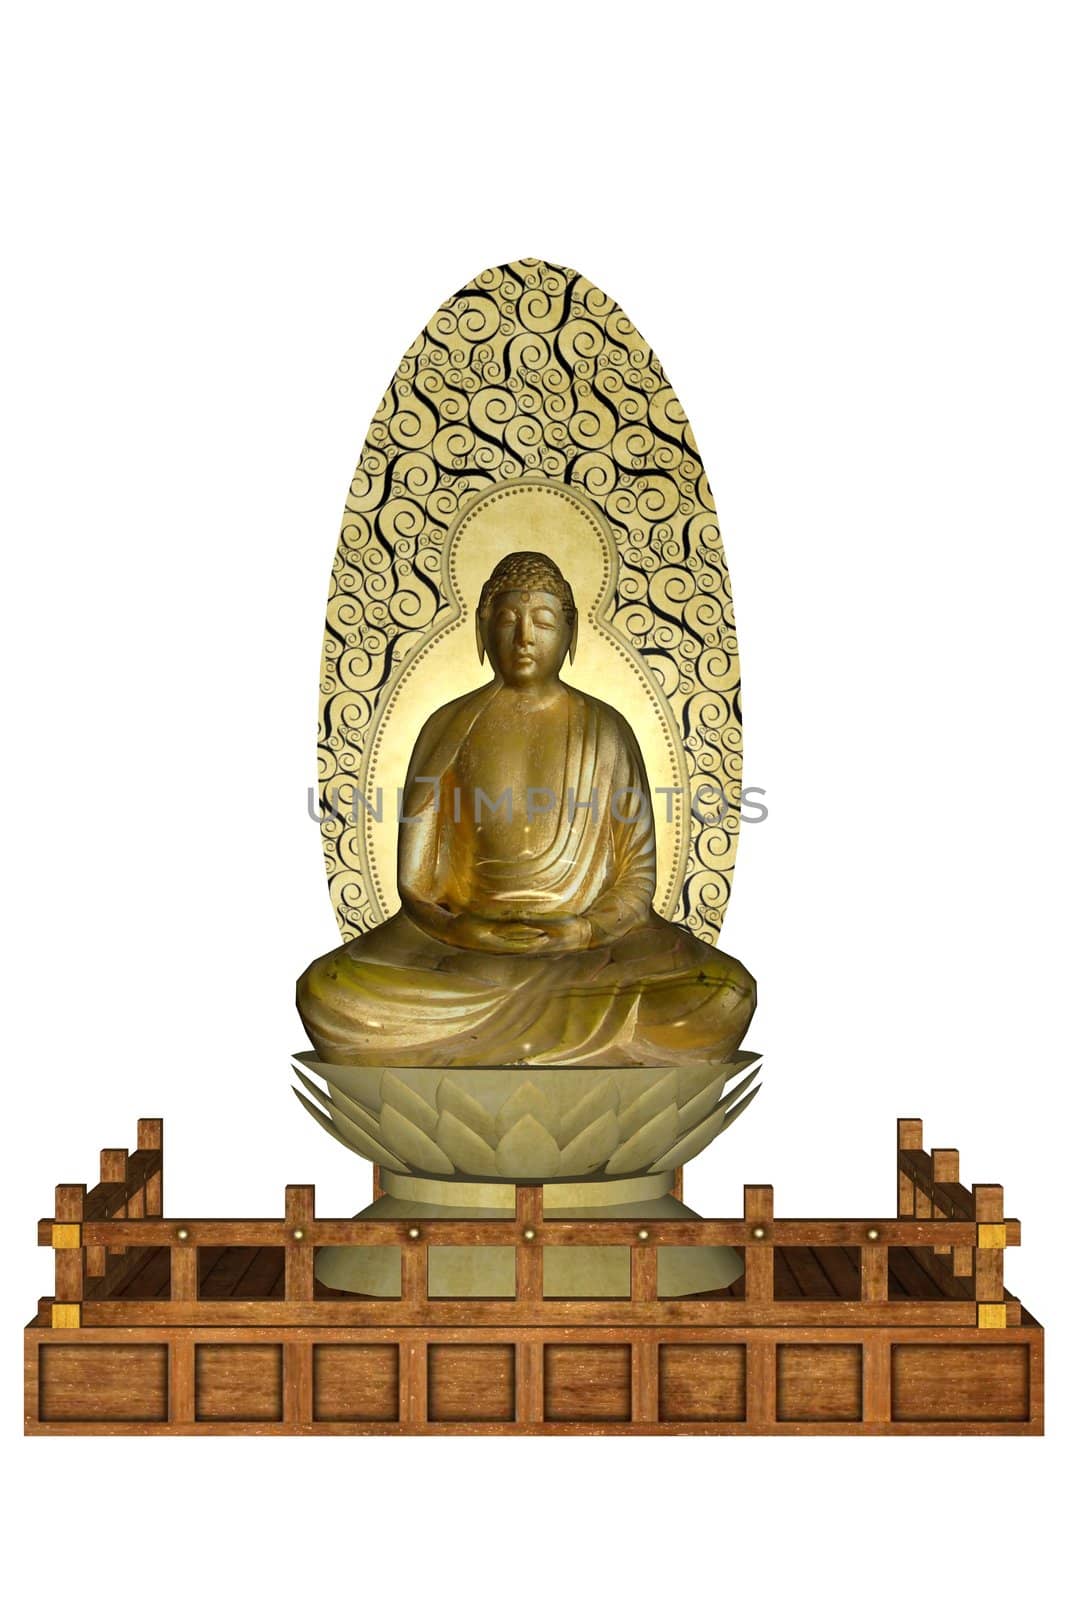 3D rendered statue of budha on white background isolated